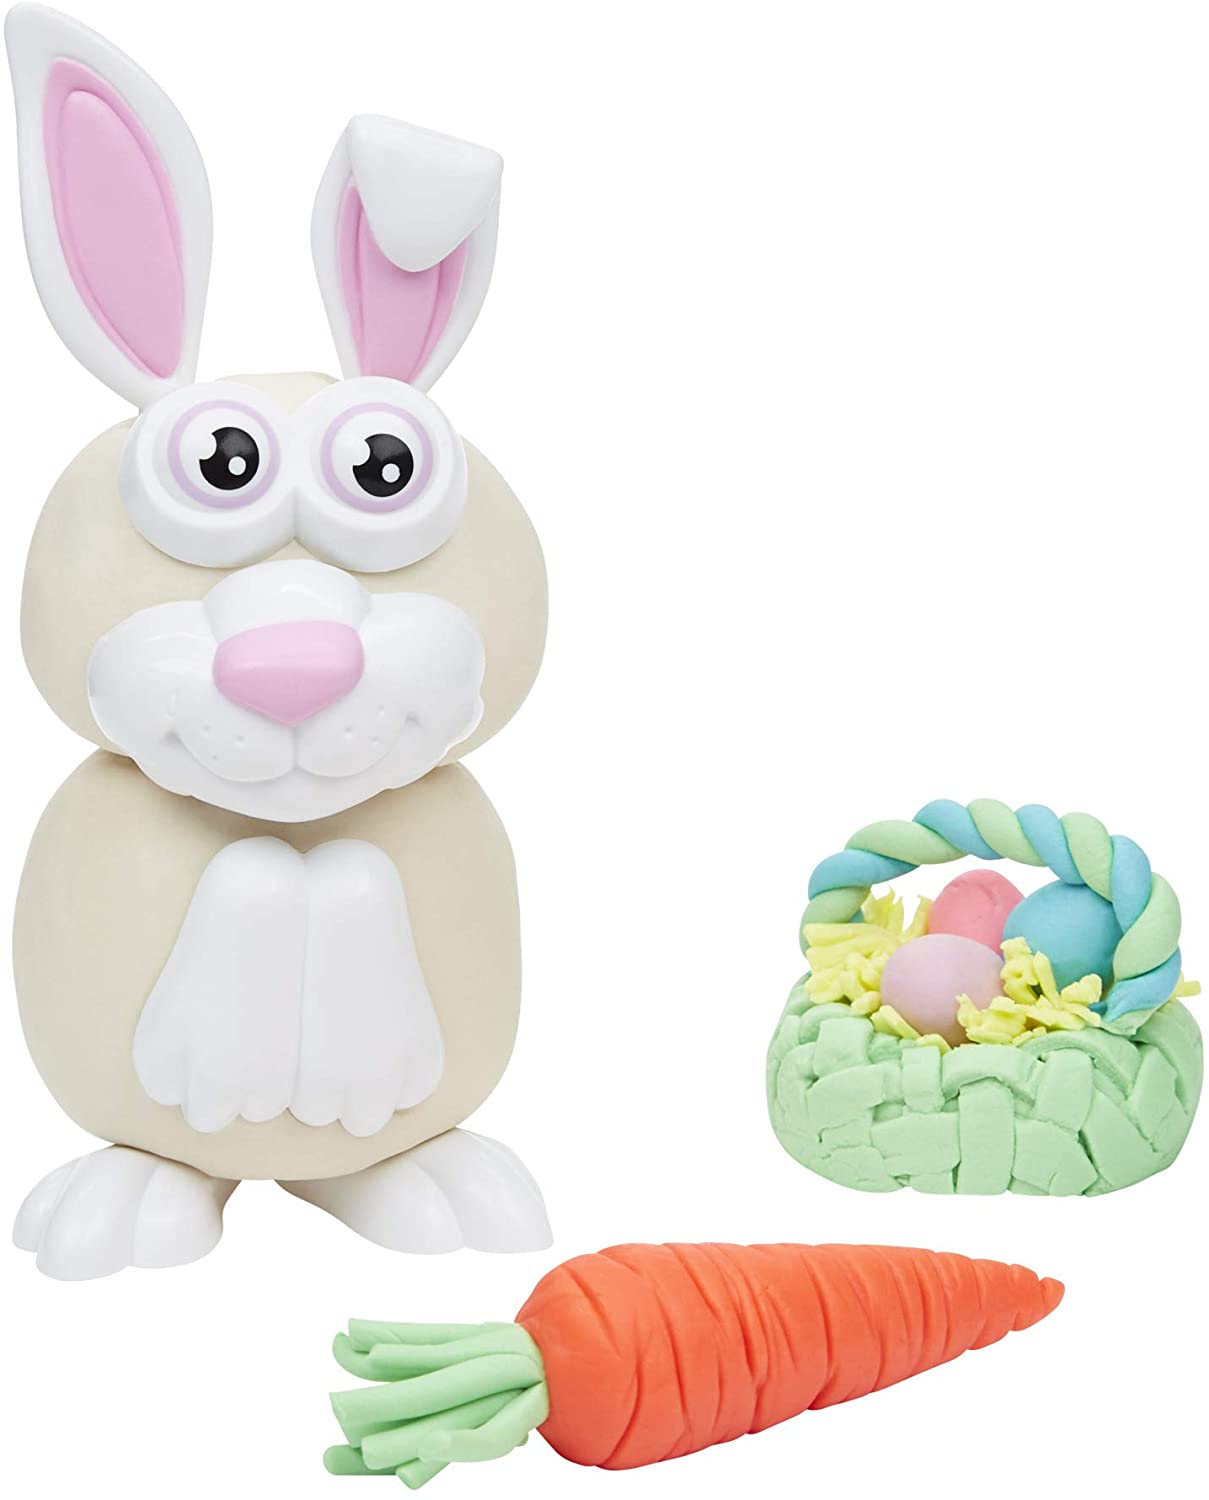 Play-Doh Easter Basket Toys 25-Piece Bundle, Make Your Own Easter Bunny Kit with Easter Eggs, Stampers, and 10 Cans of Play-Doh, Bunny Toys for Kids, 2-Ounce Cans (Amazon Exclusive)